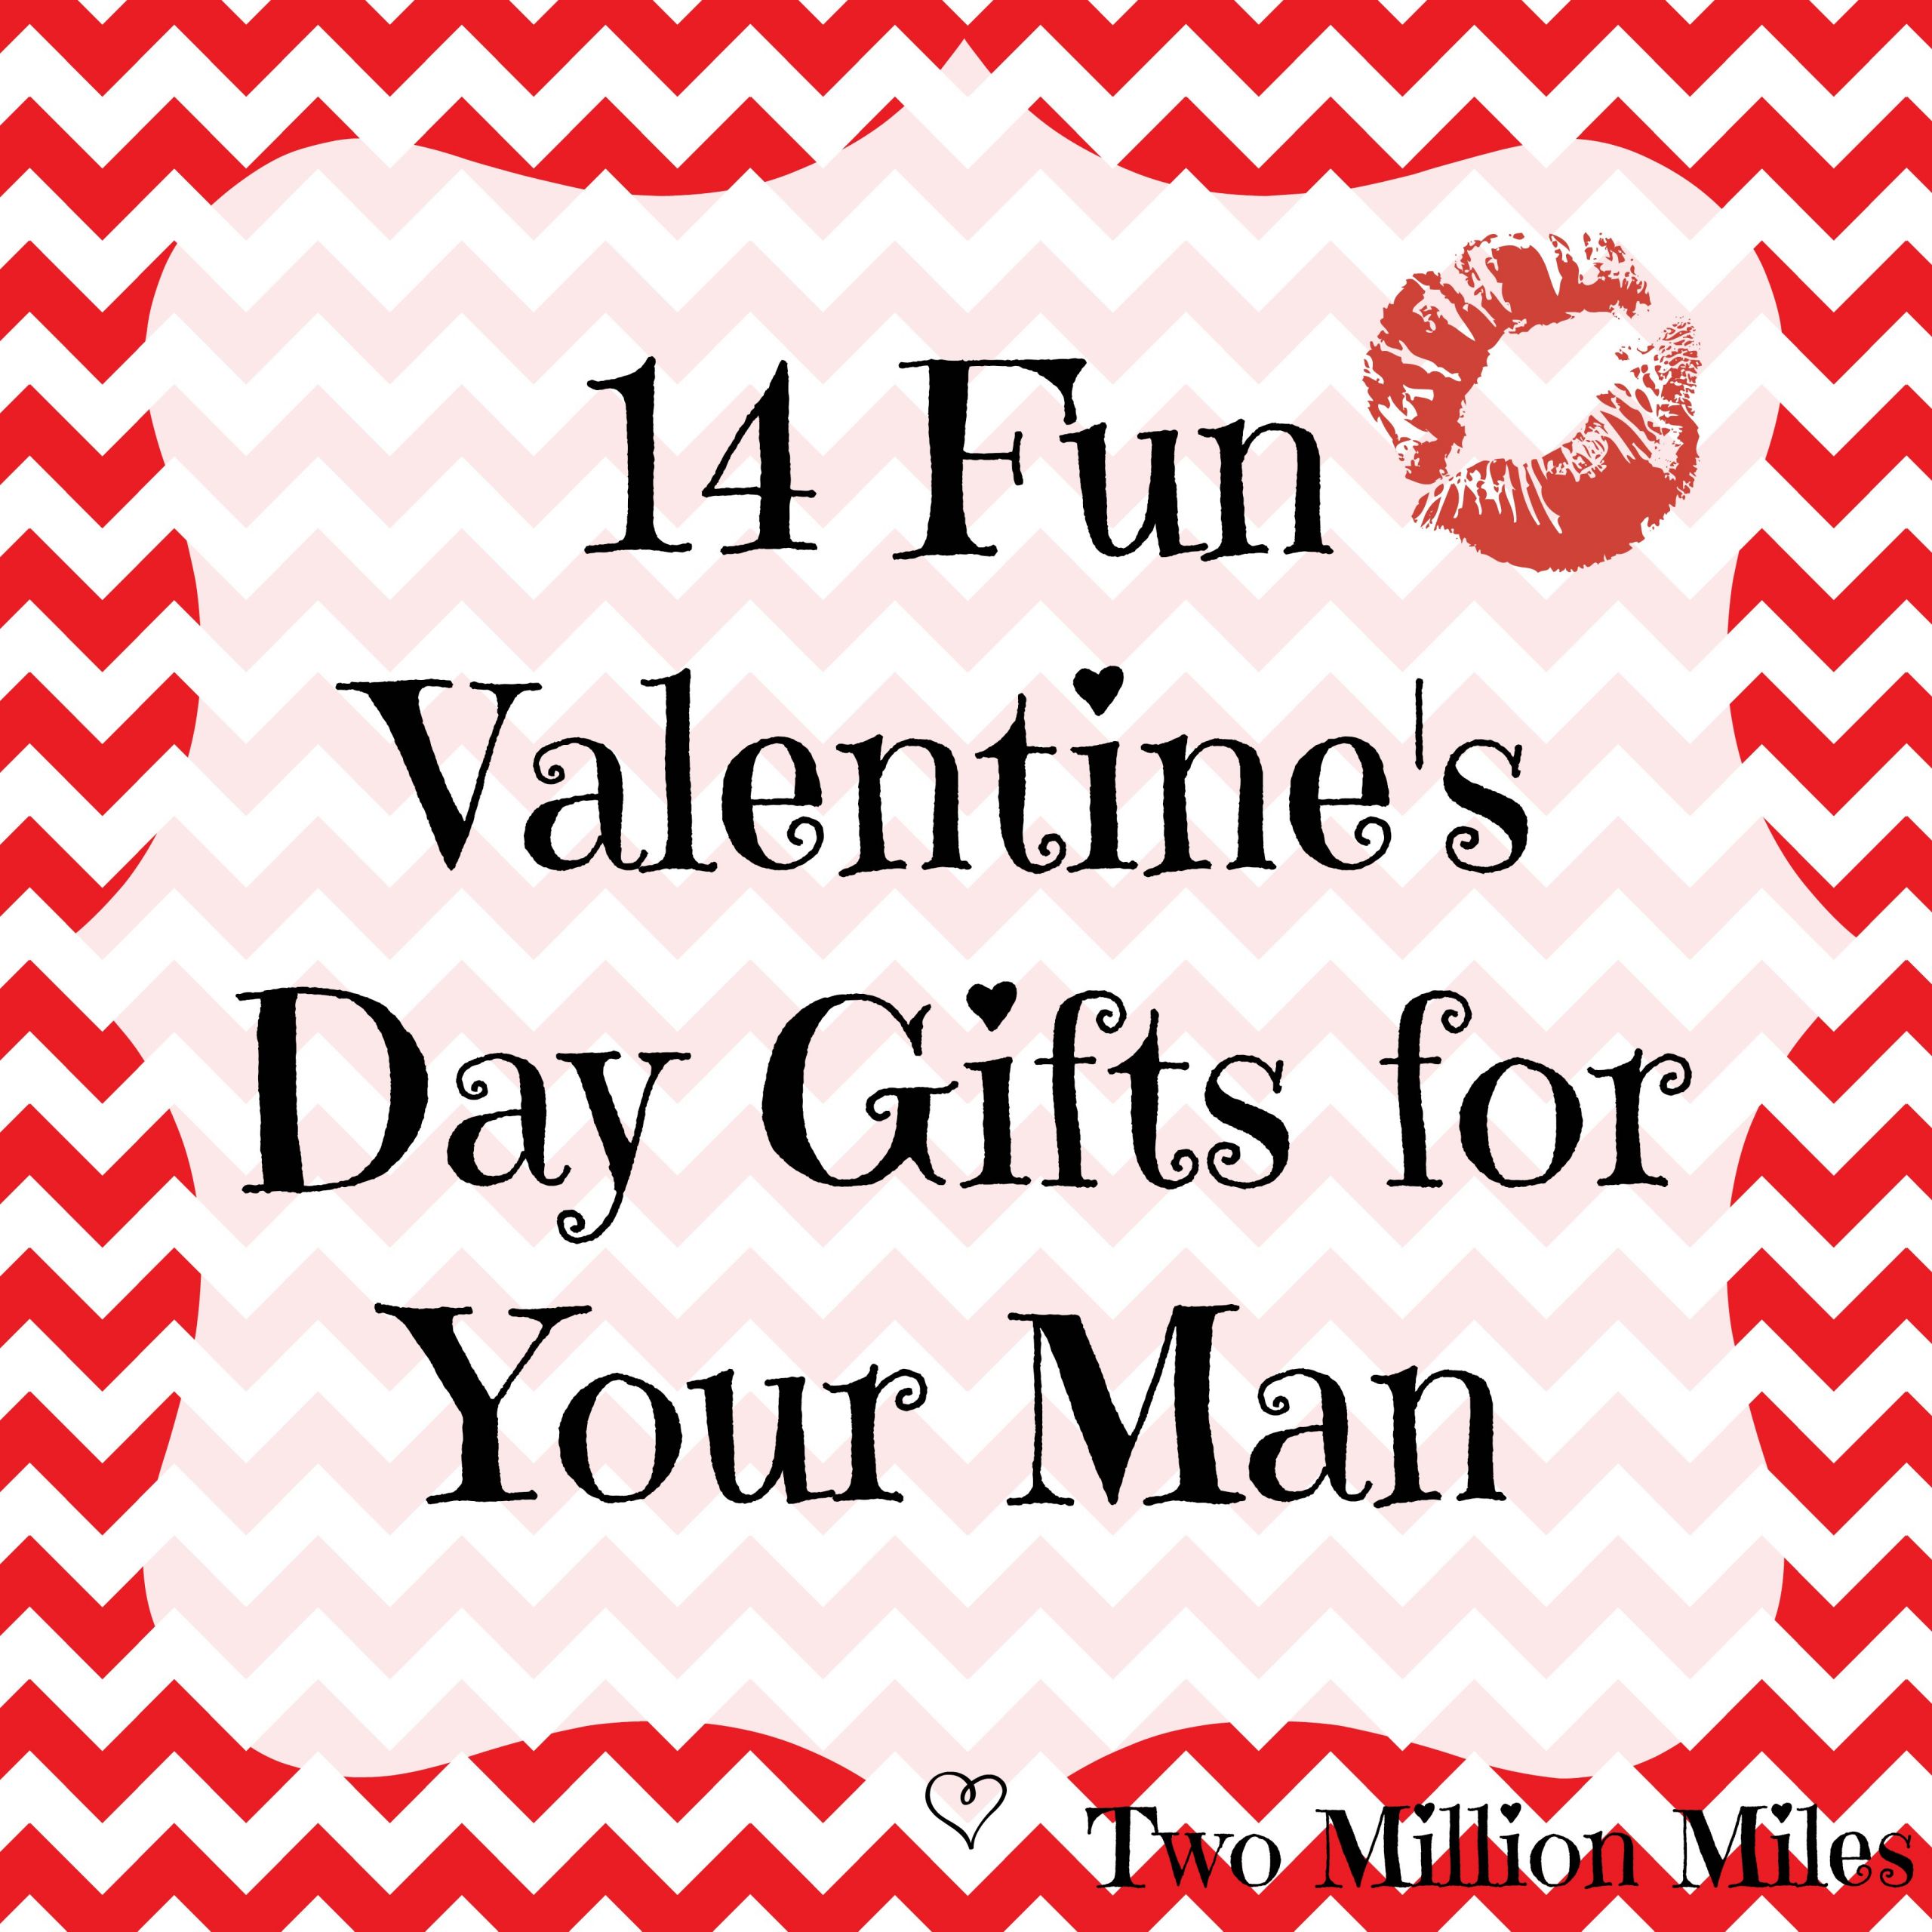 Valentines Day Gift Ideas For Guys
 14 Valentine’s Day Gifts for Your Man